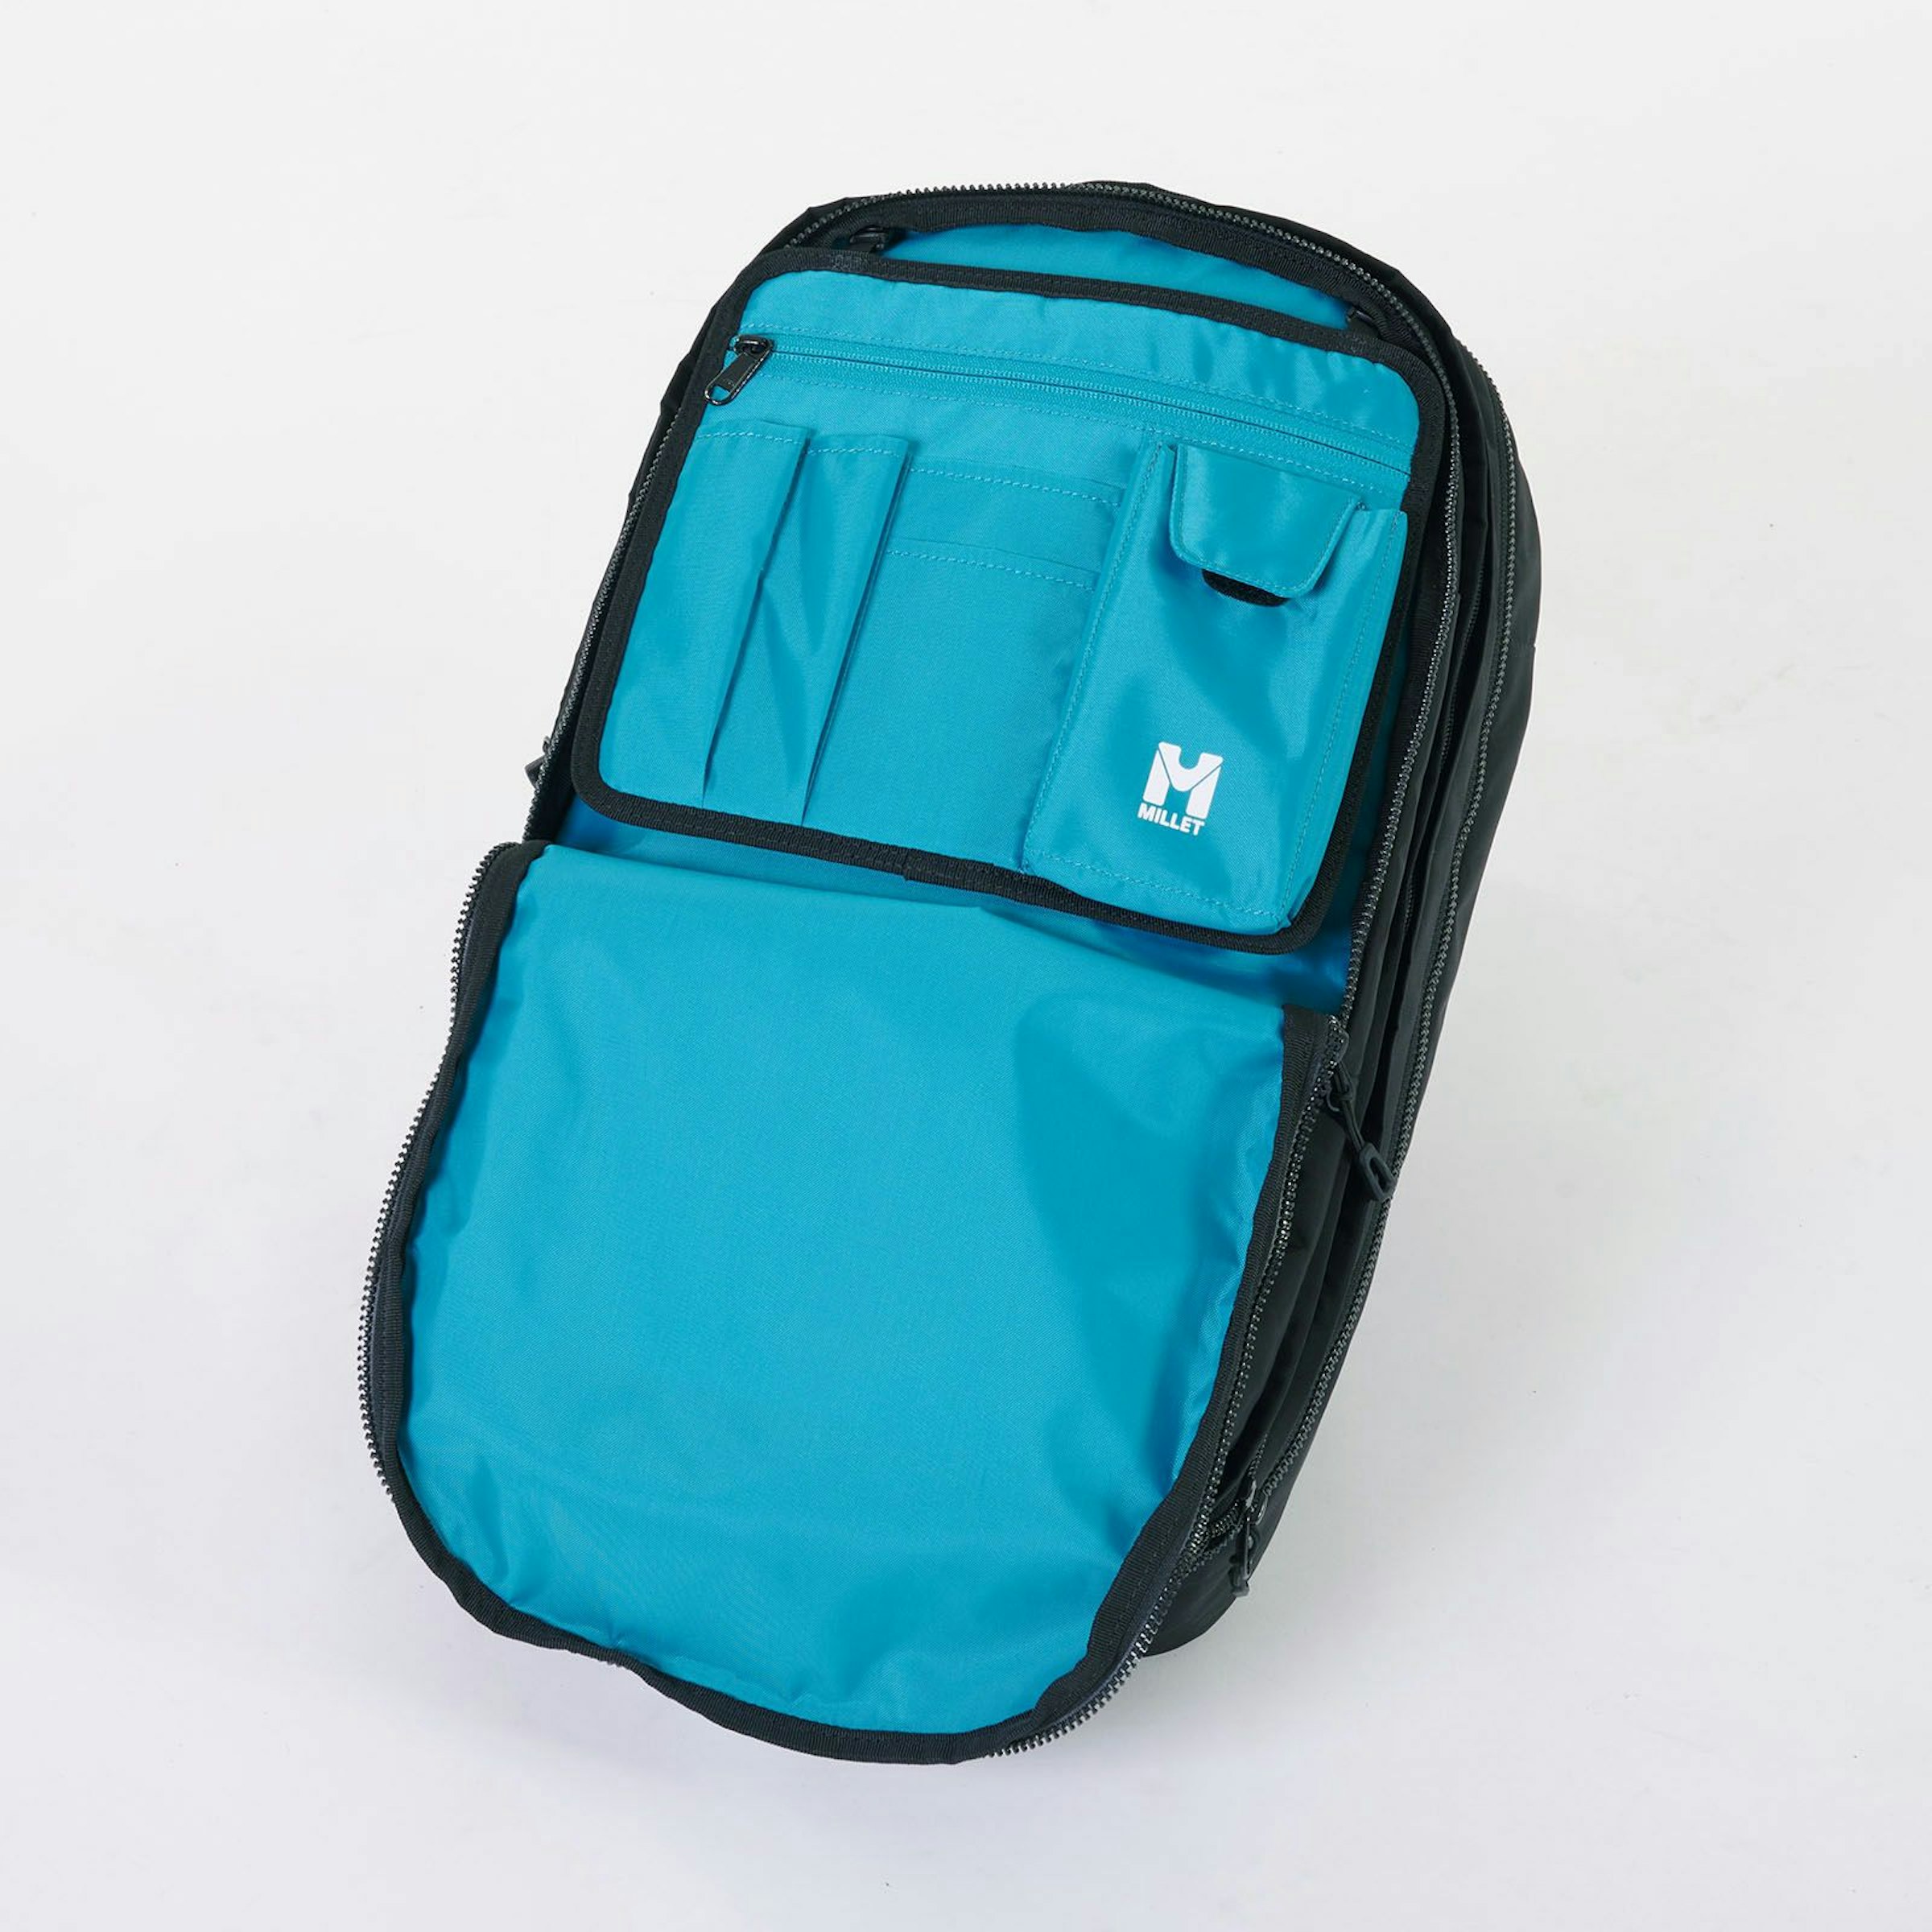 A hanging-style organizer appears when you open the zipper on the front of the backpack